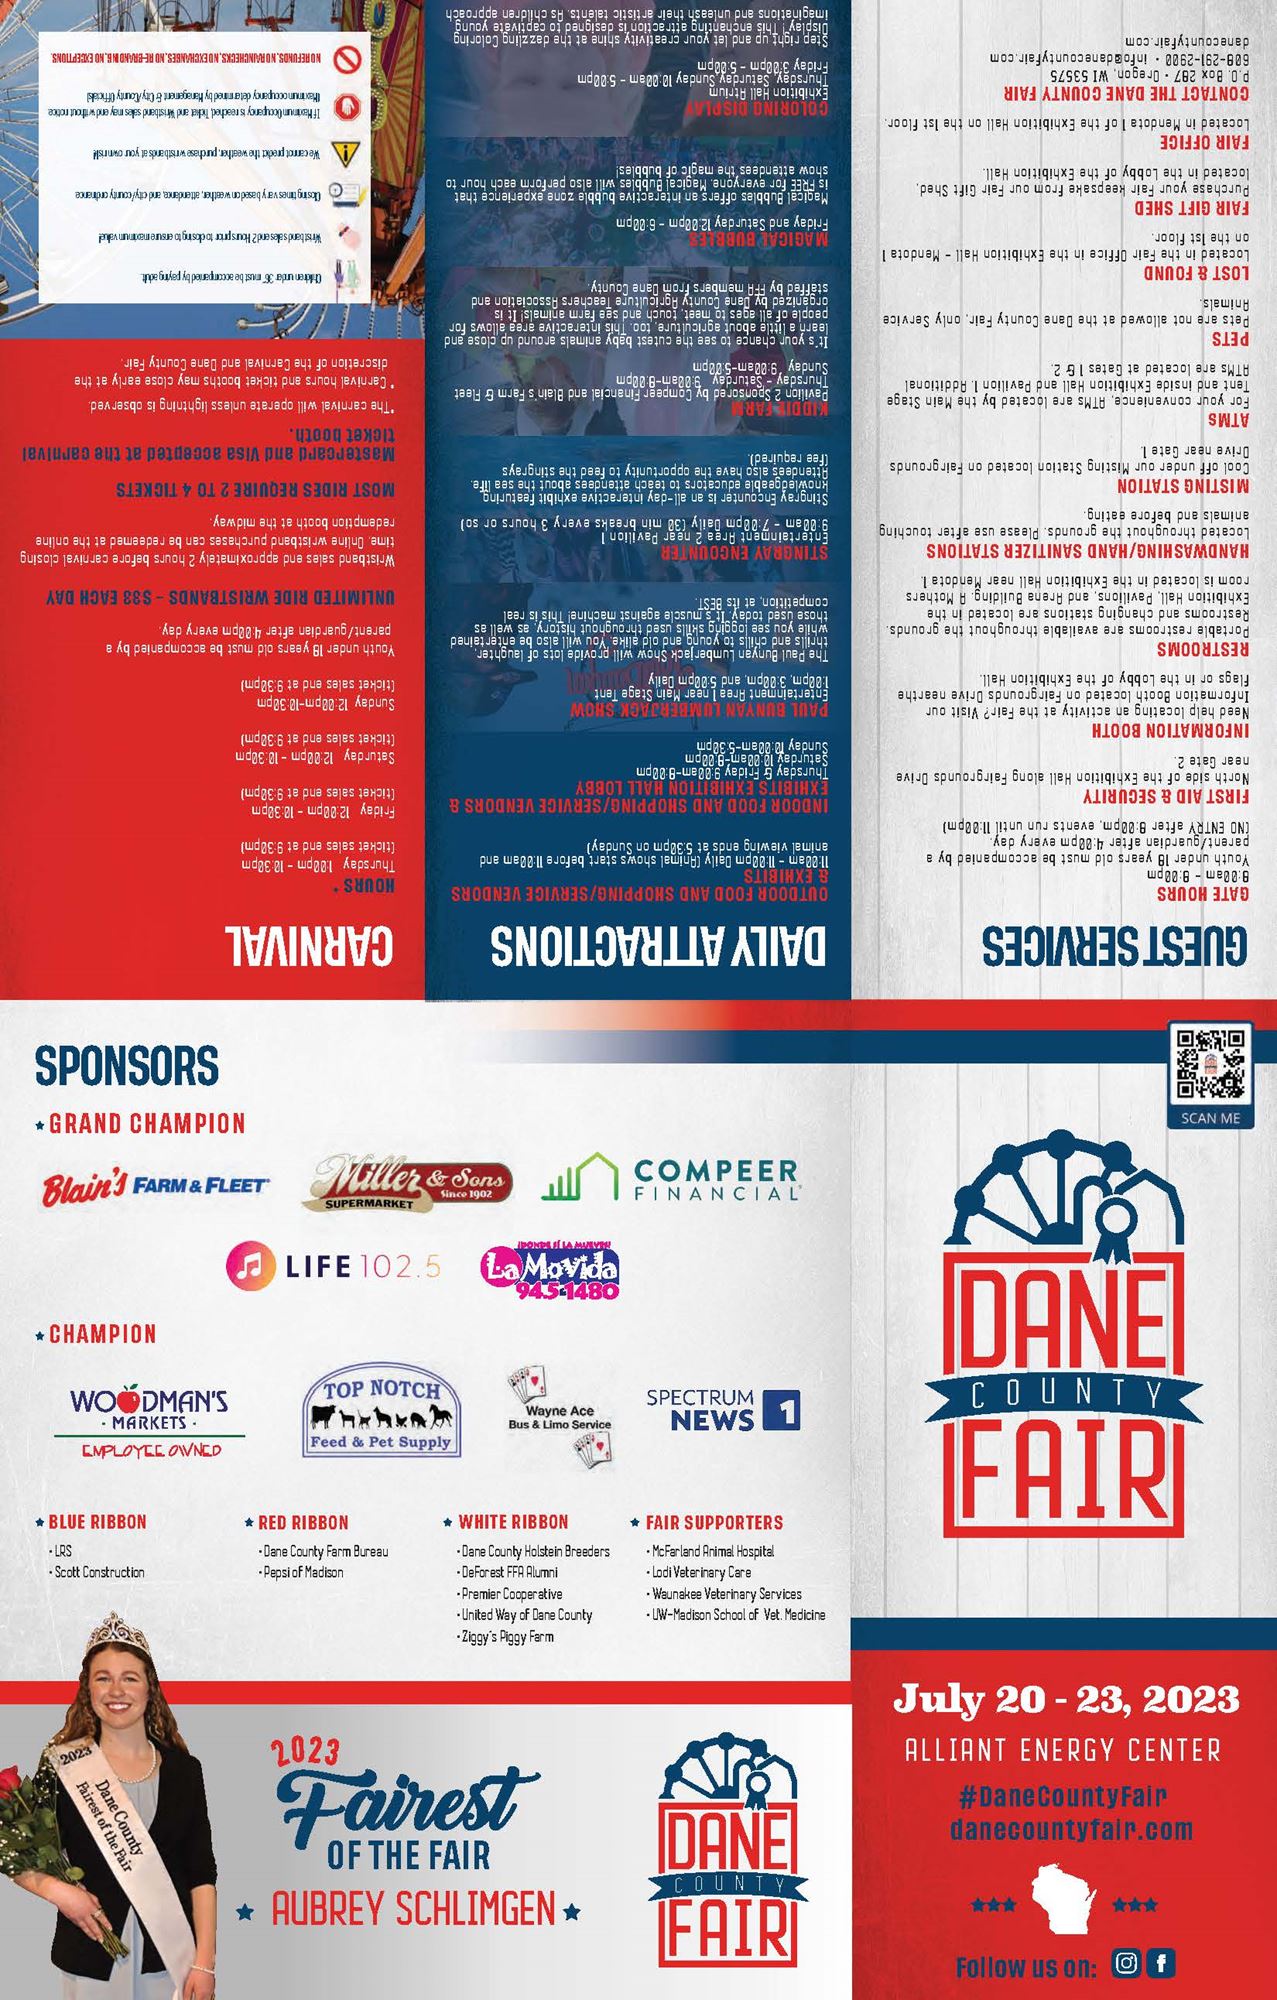 Images.ashx?t=ig&rid=DaneCountyFairWI&i=DCF 2023  Brochure Final Low Res   Page 2 